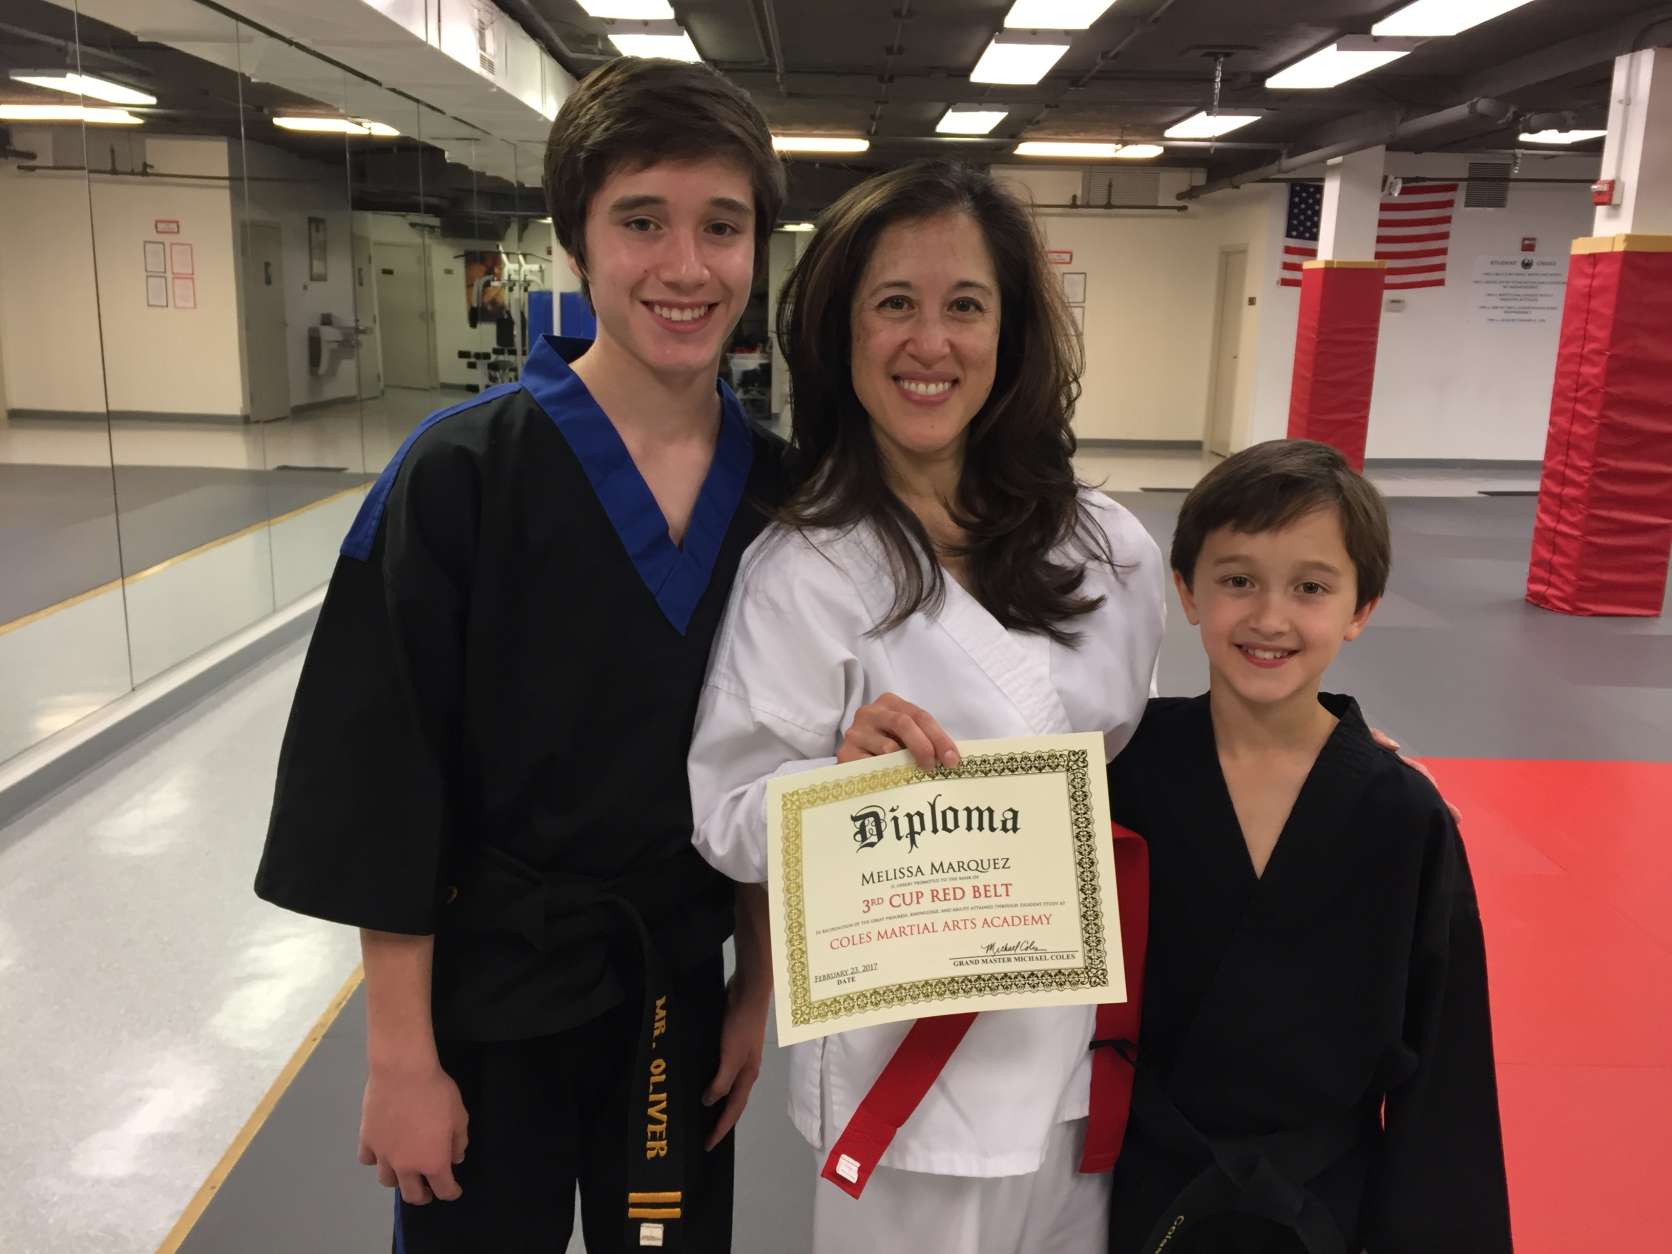 Melissa Marquez shows off her black belt sons, and the red belt diploma she earned. (WTOP/Michelle Basch)